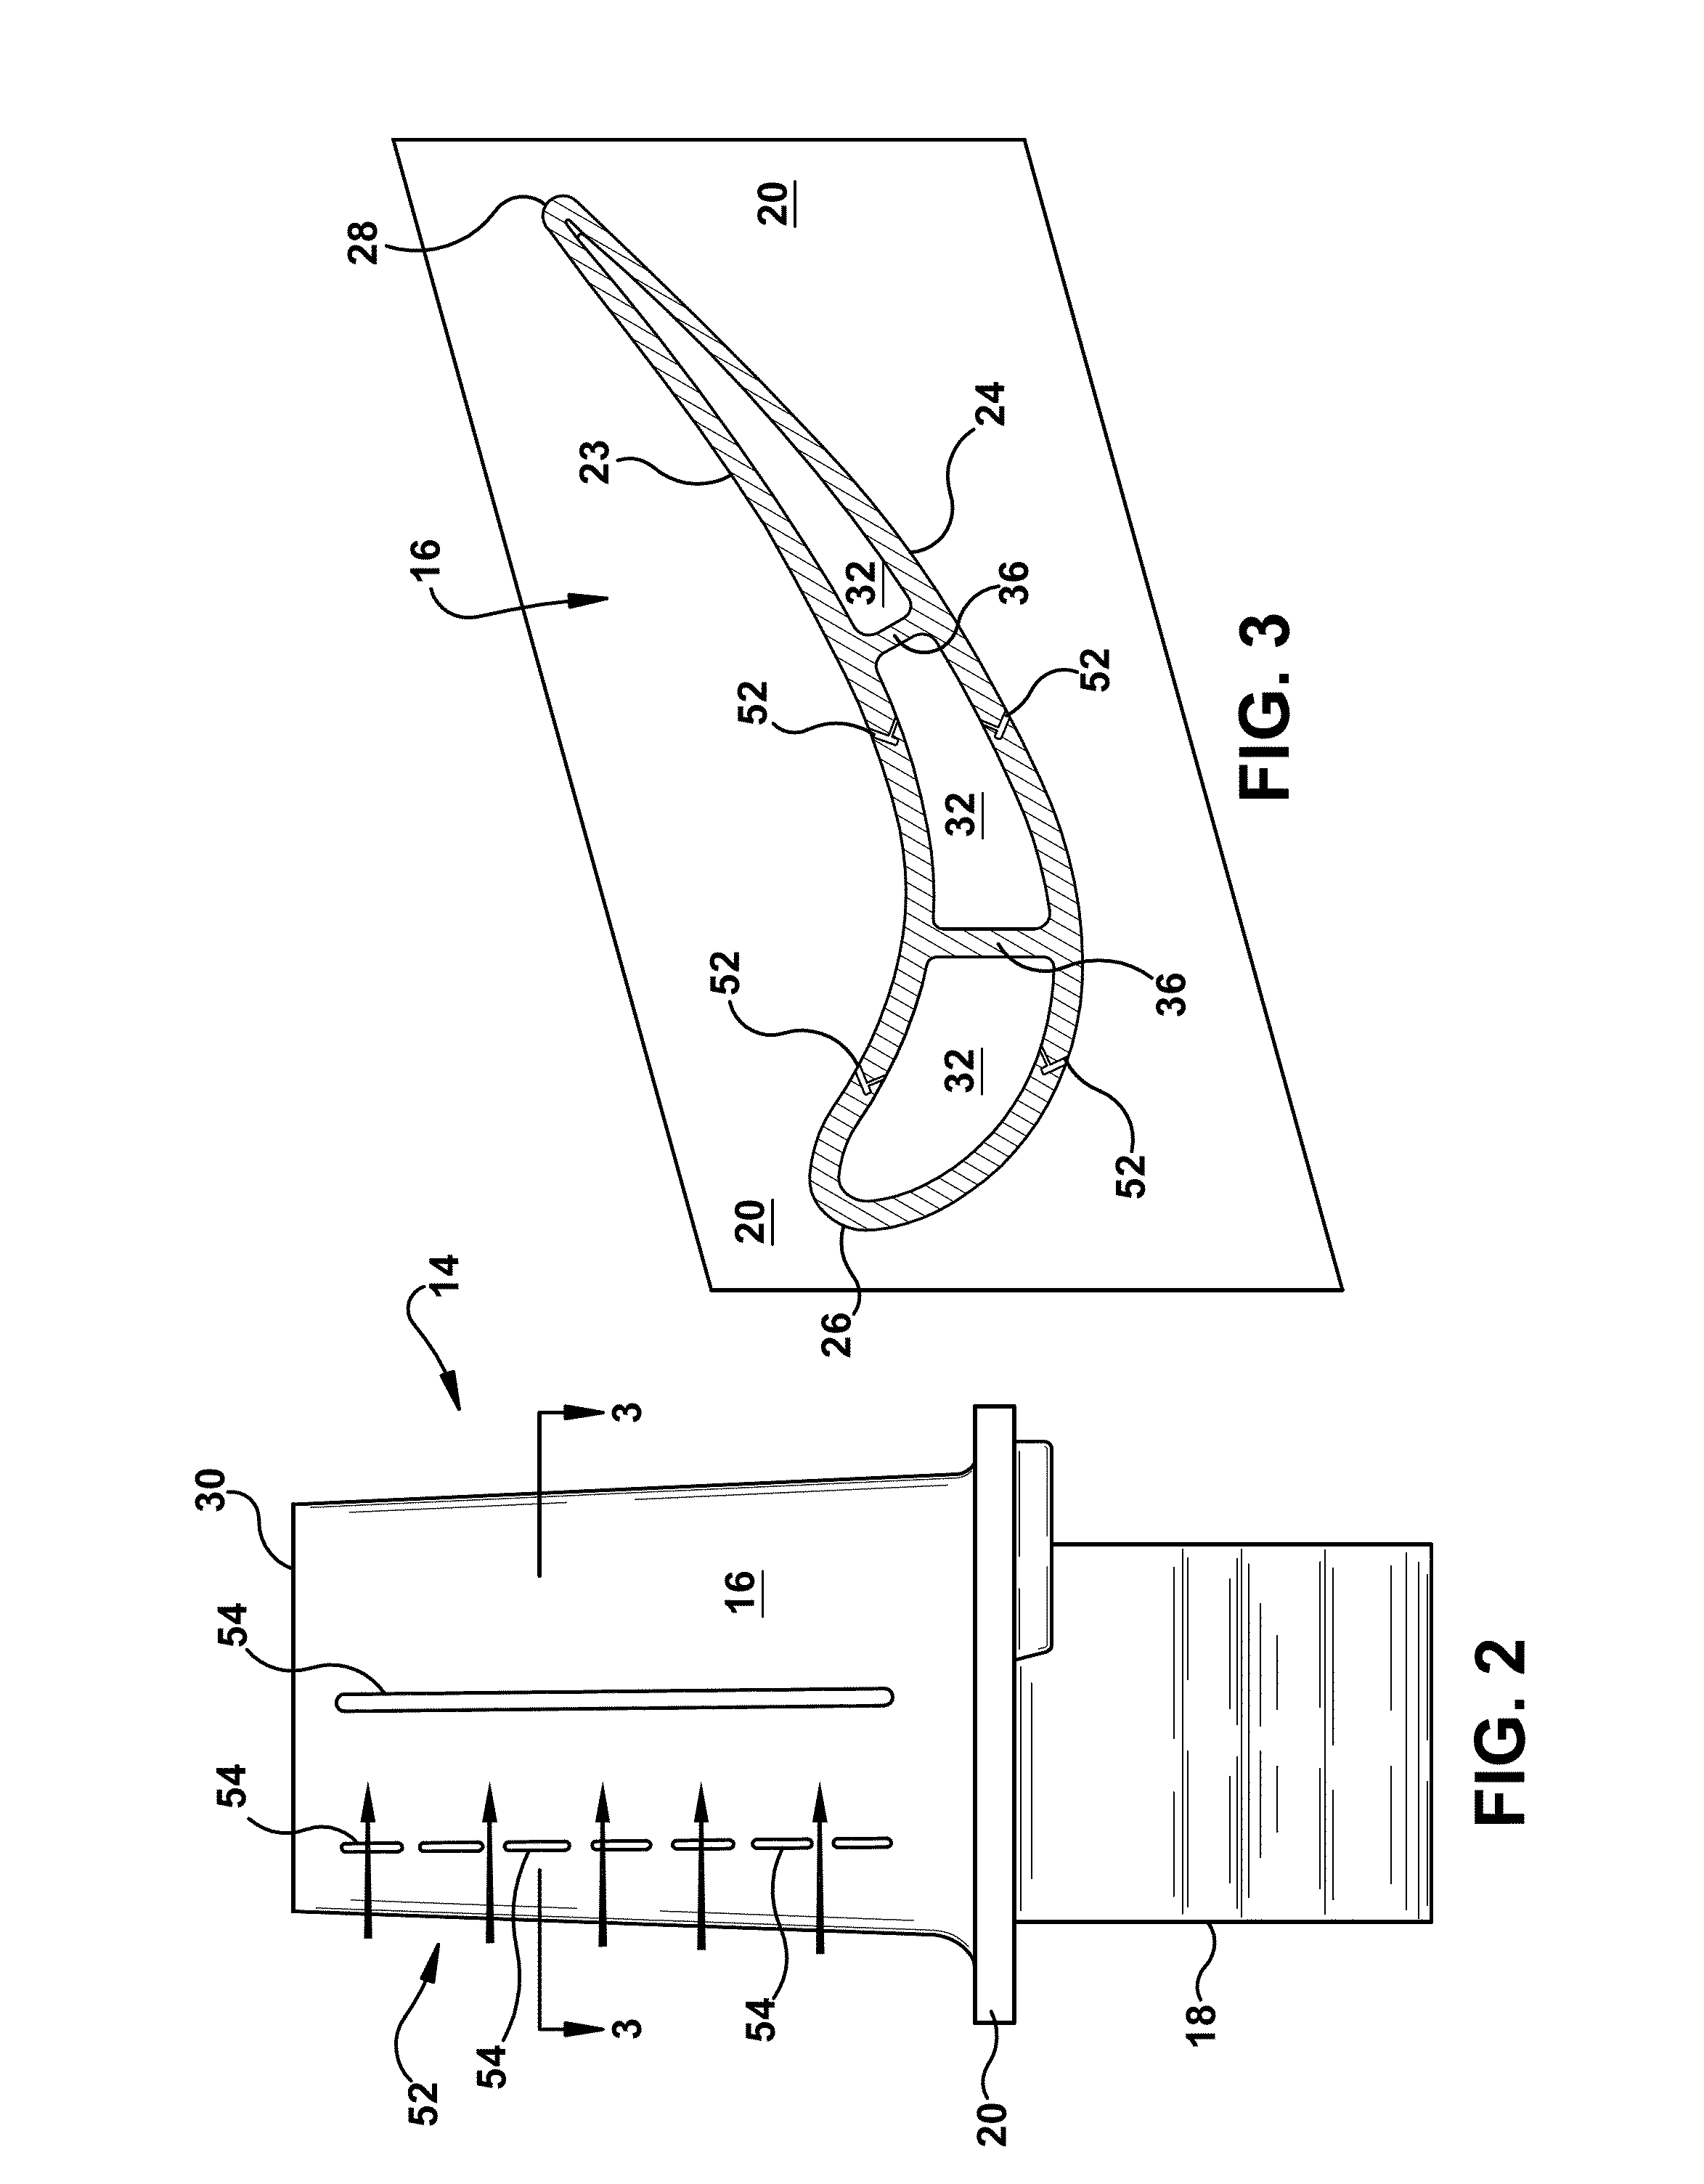 Metered cooling slots for turbine blades